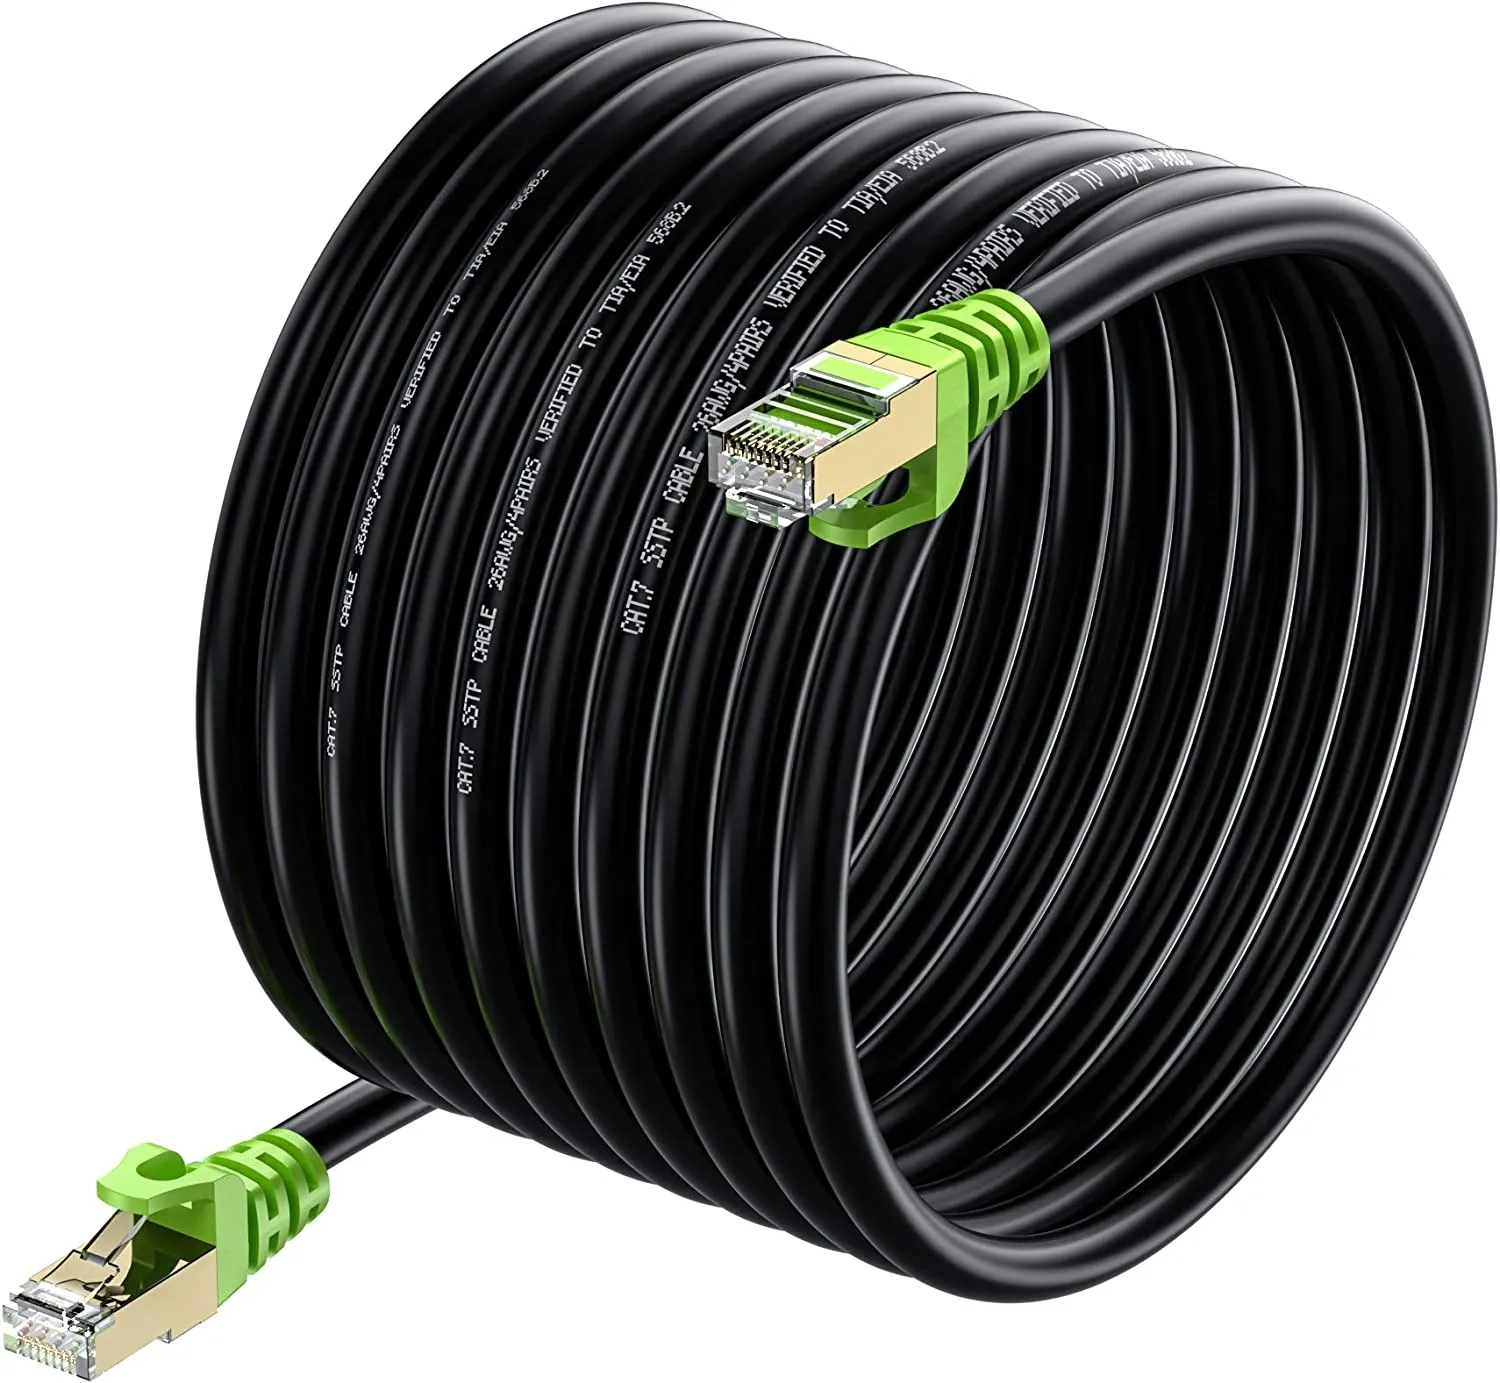 High Quality 40gbps 2000mhz Cat8 Rj45 Ethernet Cable Lan Network Cord Patch Cord Cat 8 Ethernet Cable